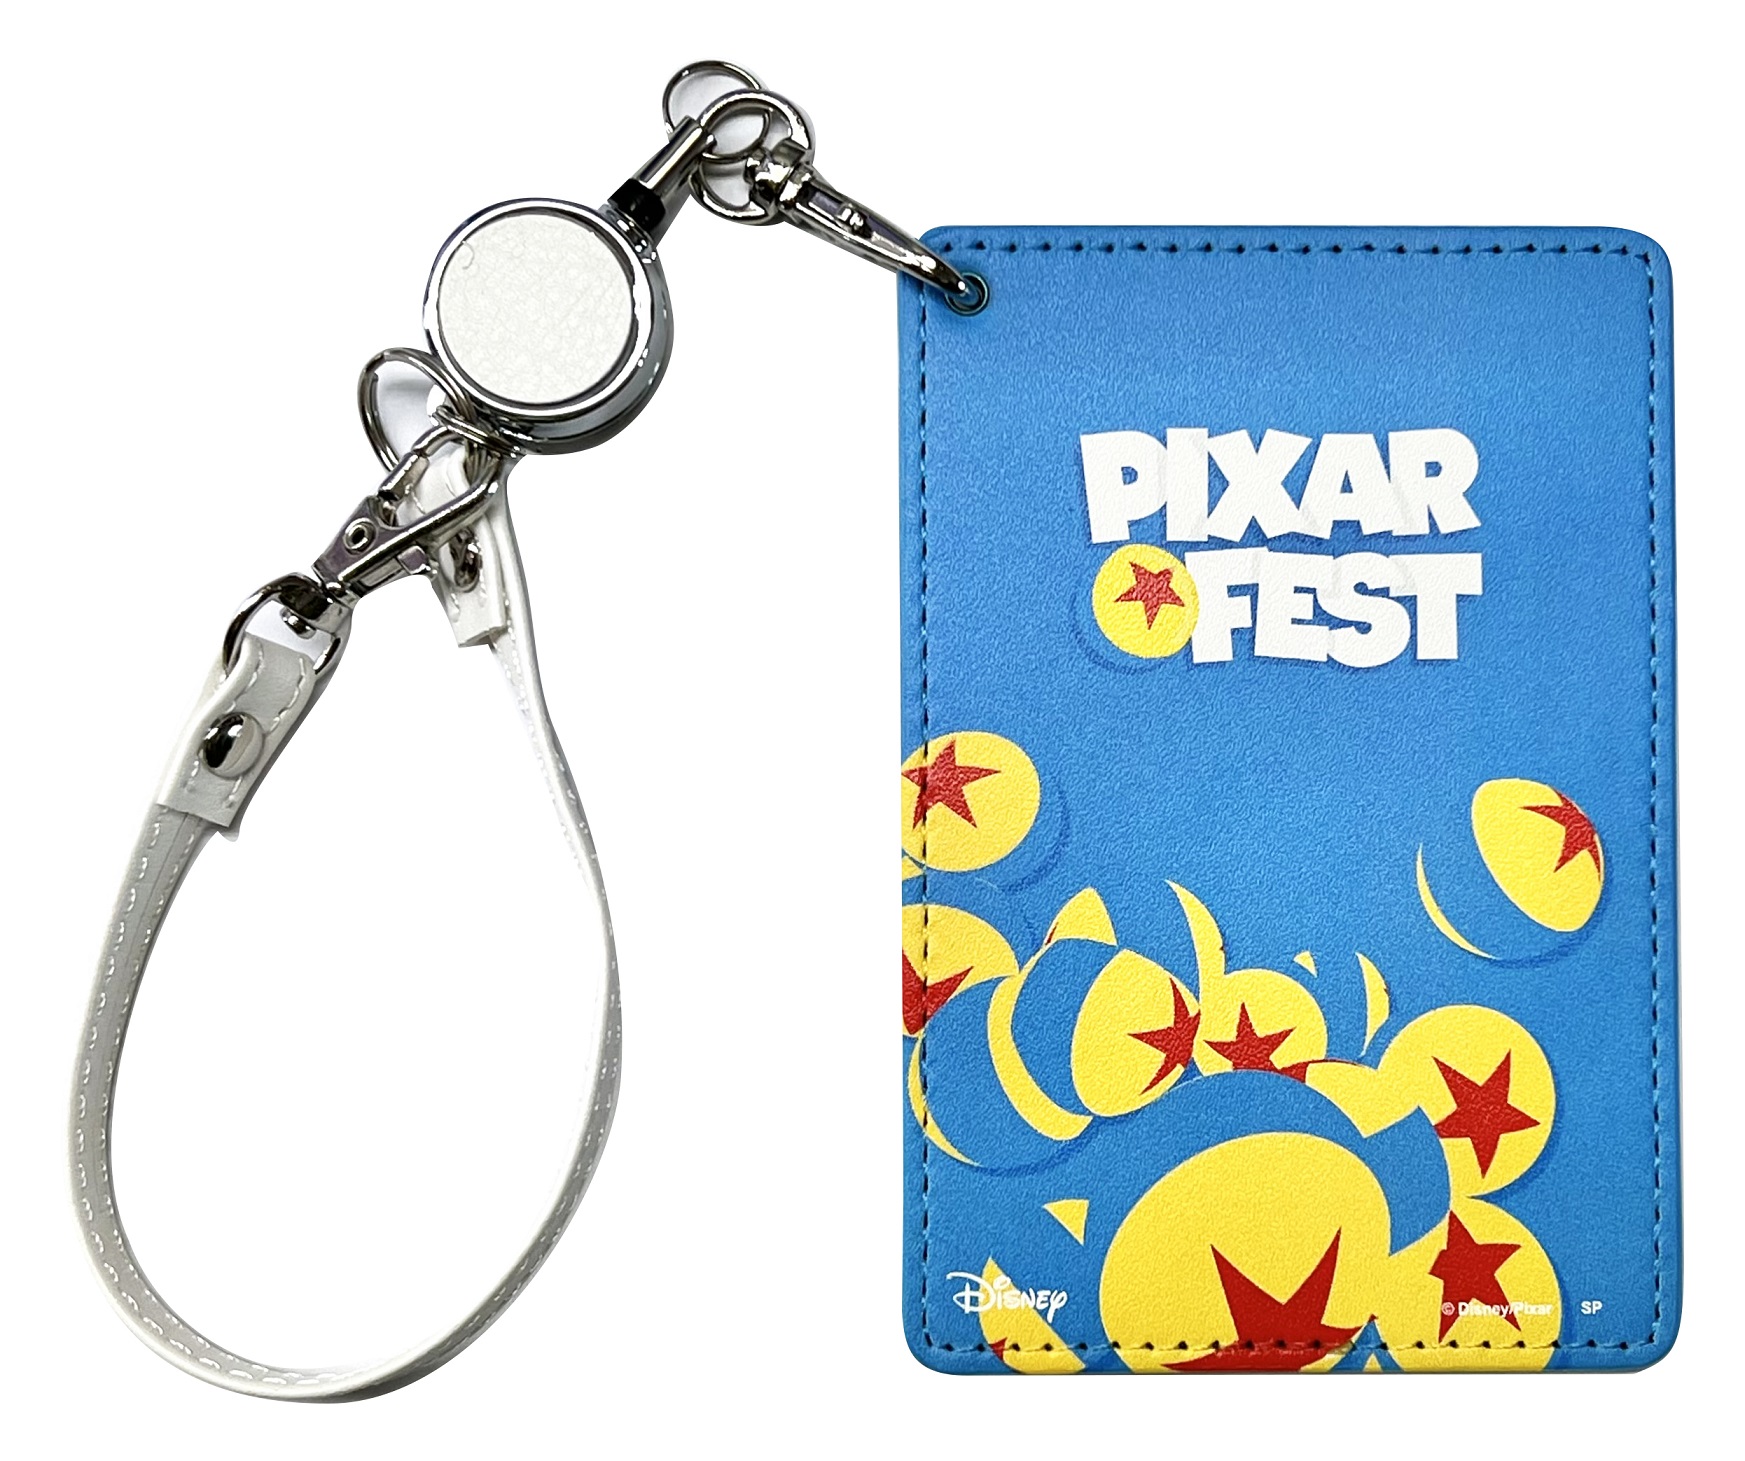 pixar-fest-pop-up-store-by-small-planet3-3-2